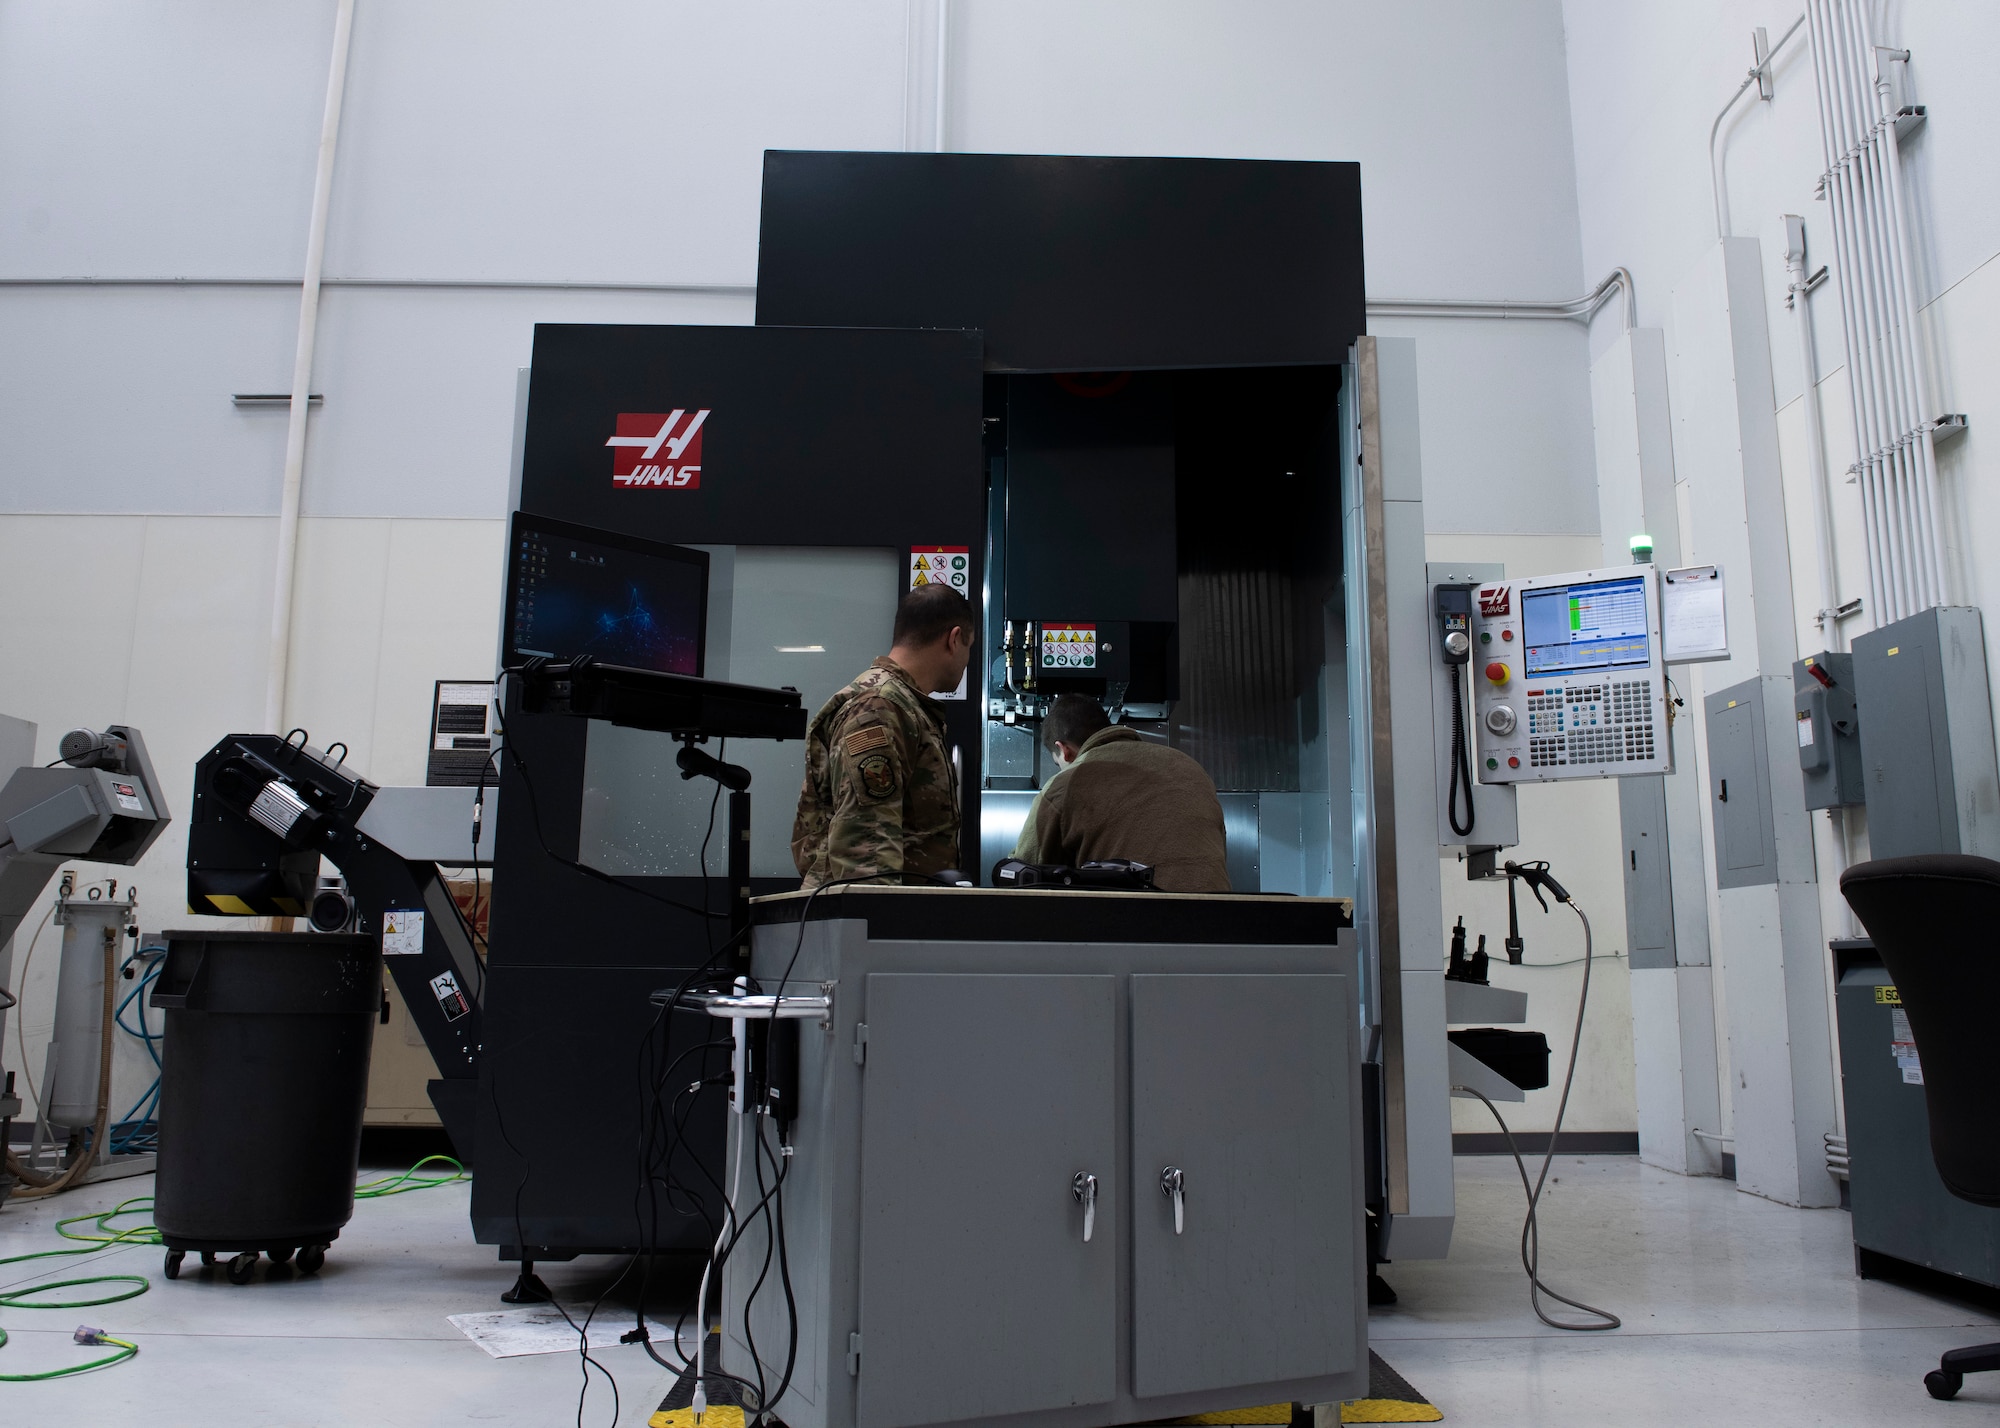 U.S. Air Force Tech. Sgt. Kevin Collins, 366th Maintenance Squadron aircraft metals technology section chief and U.S. Air Force Airman 1st Class Luke Haener, 366th MXS aircraft metals technology craftsman stand in front of a metal cutting or CNC machine, March 2, 2019, at Mountain Home Air Force Base, Idaho. The HandyScan sends the 3D image to the computer that then sends it to the CNC machine. (U.S. Air Force photo by Airman Natalie Rubenak)